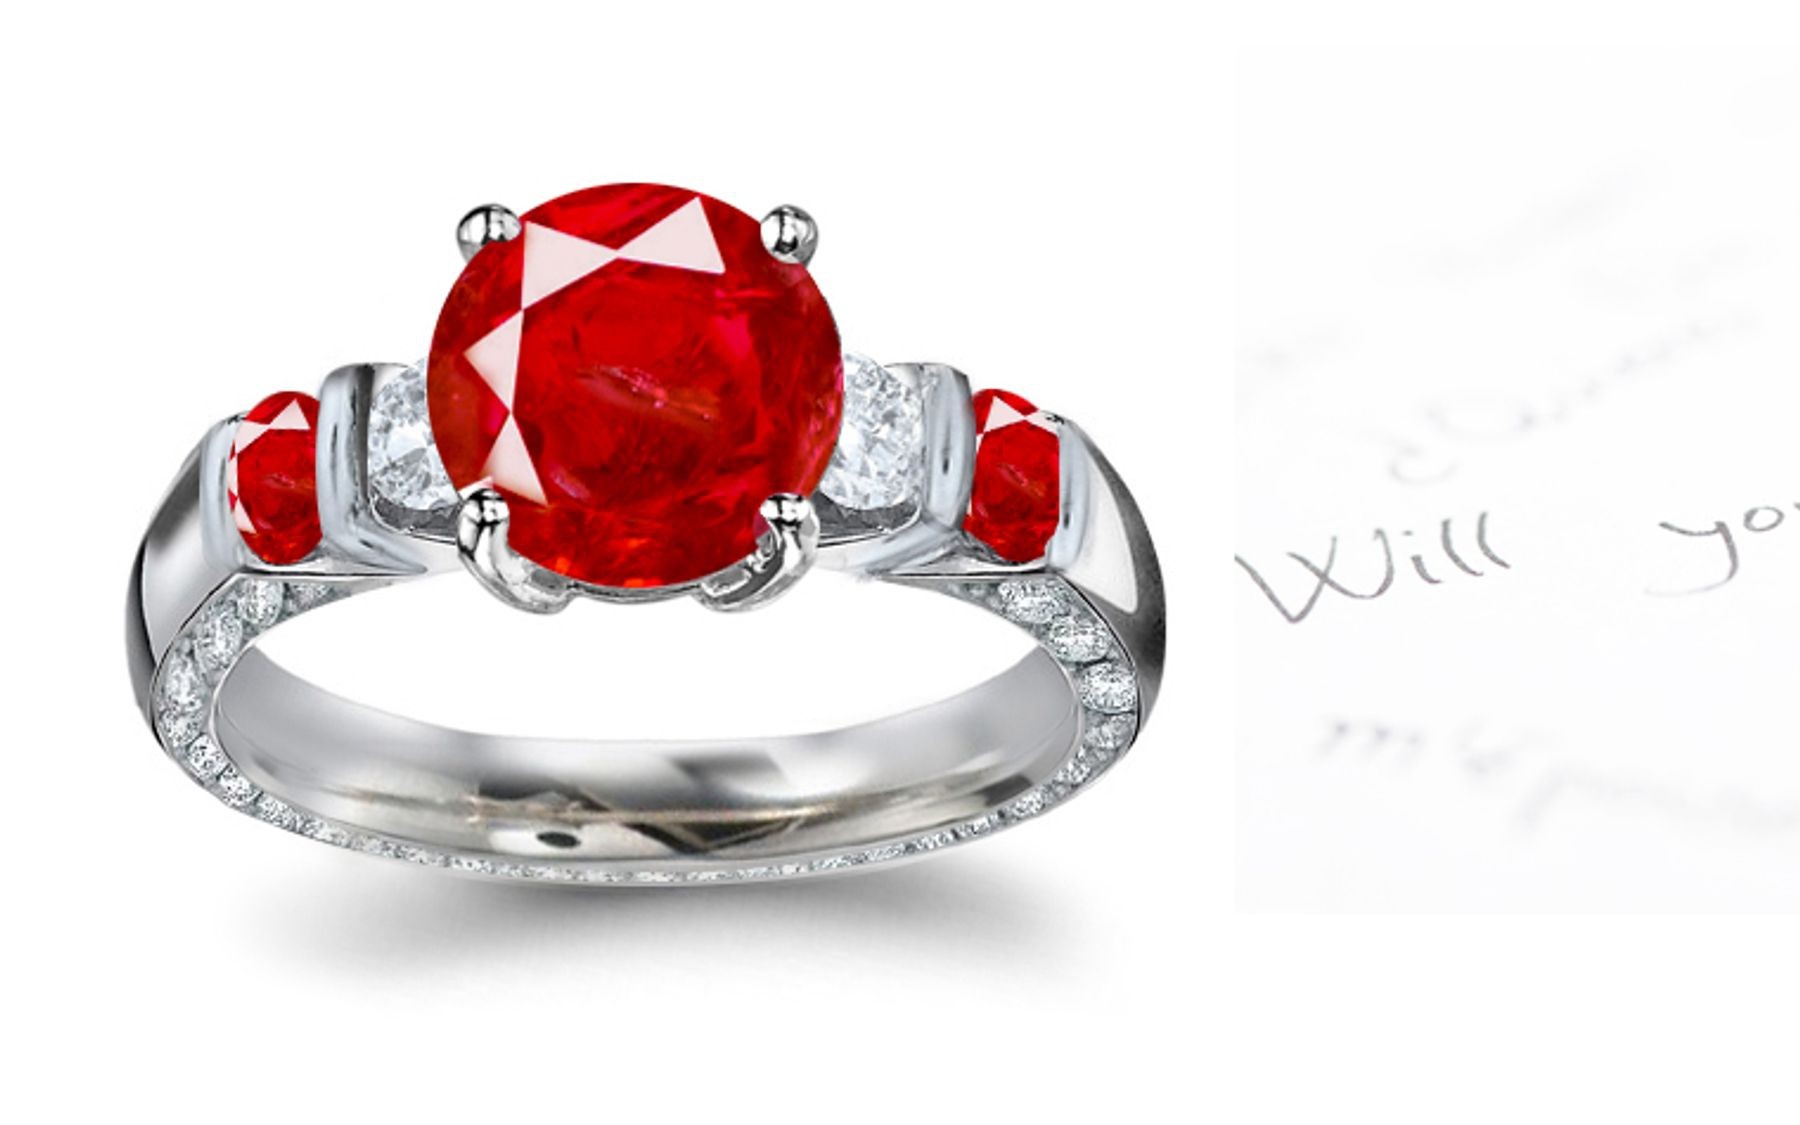 Unusual Advantages: See Available Options Glittering Diamond & Red Hue Ruby Five Stone Ring in Platinum & 14k Gold Most Surely Secured